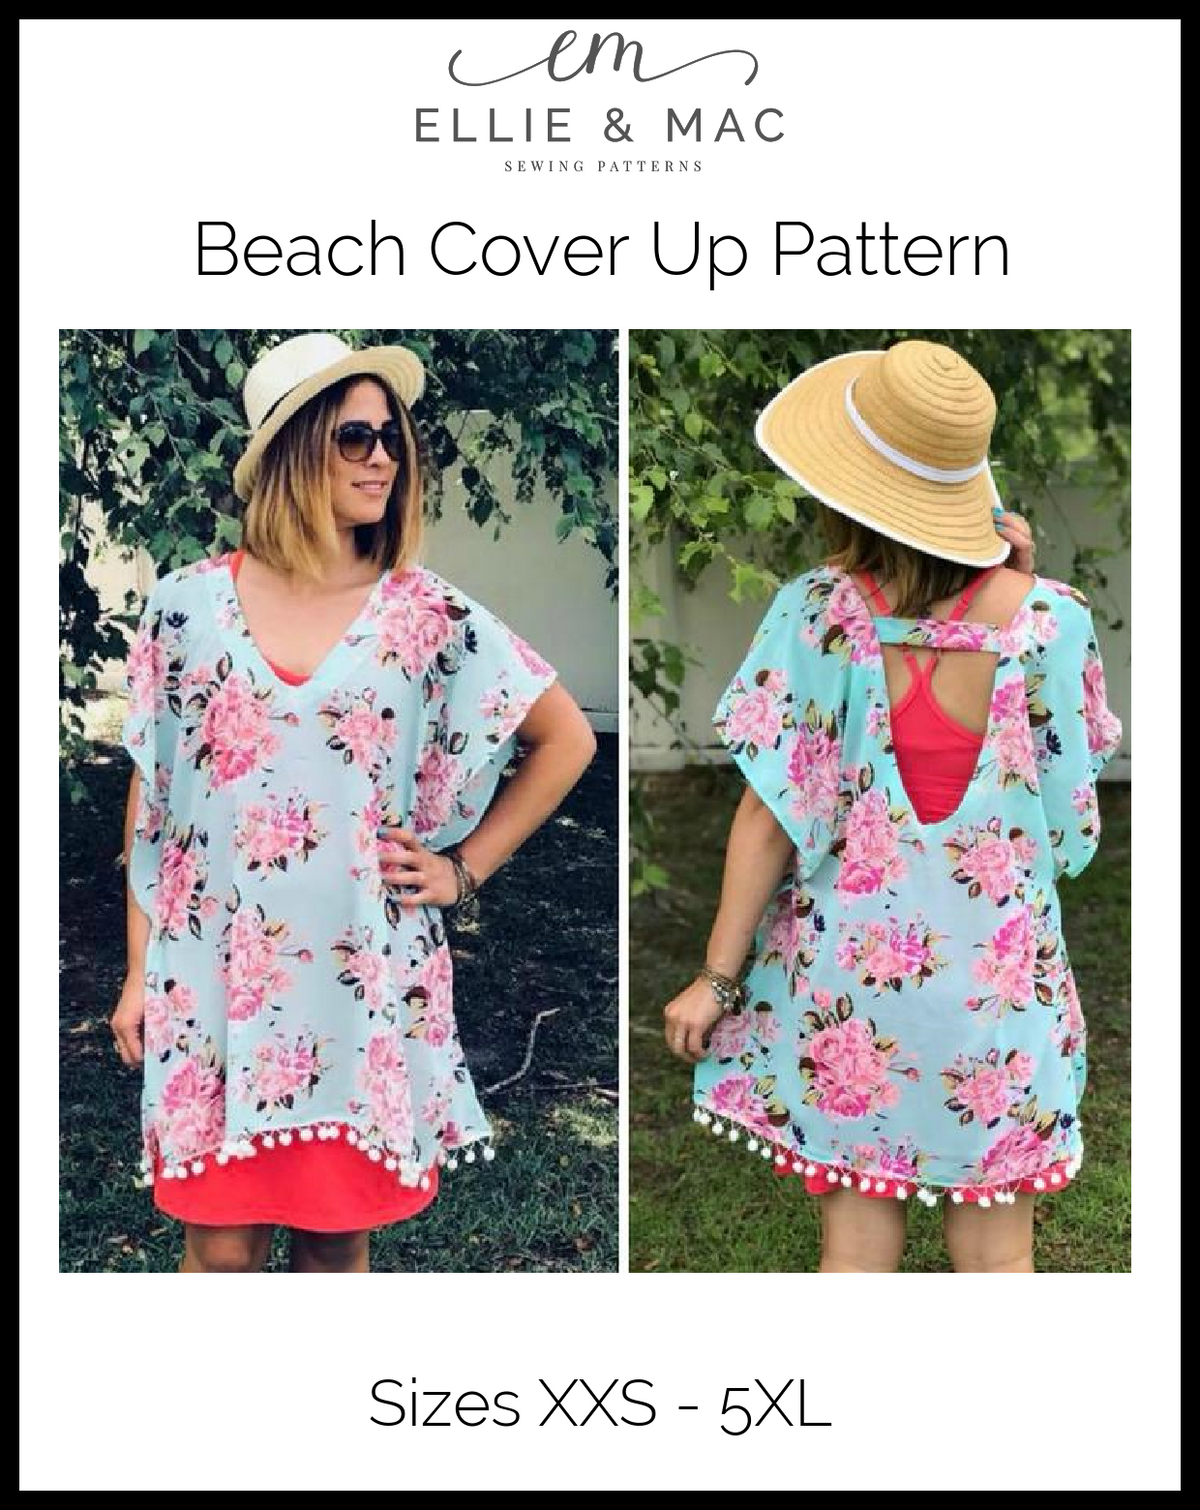 Beach Cover Up Pattern